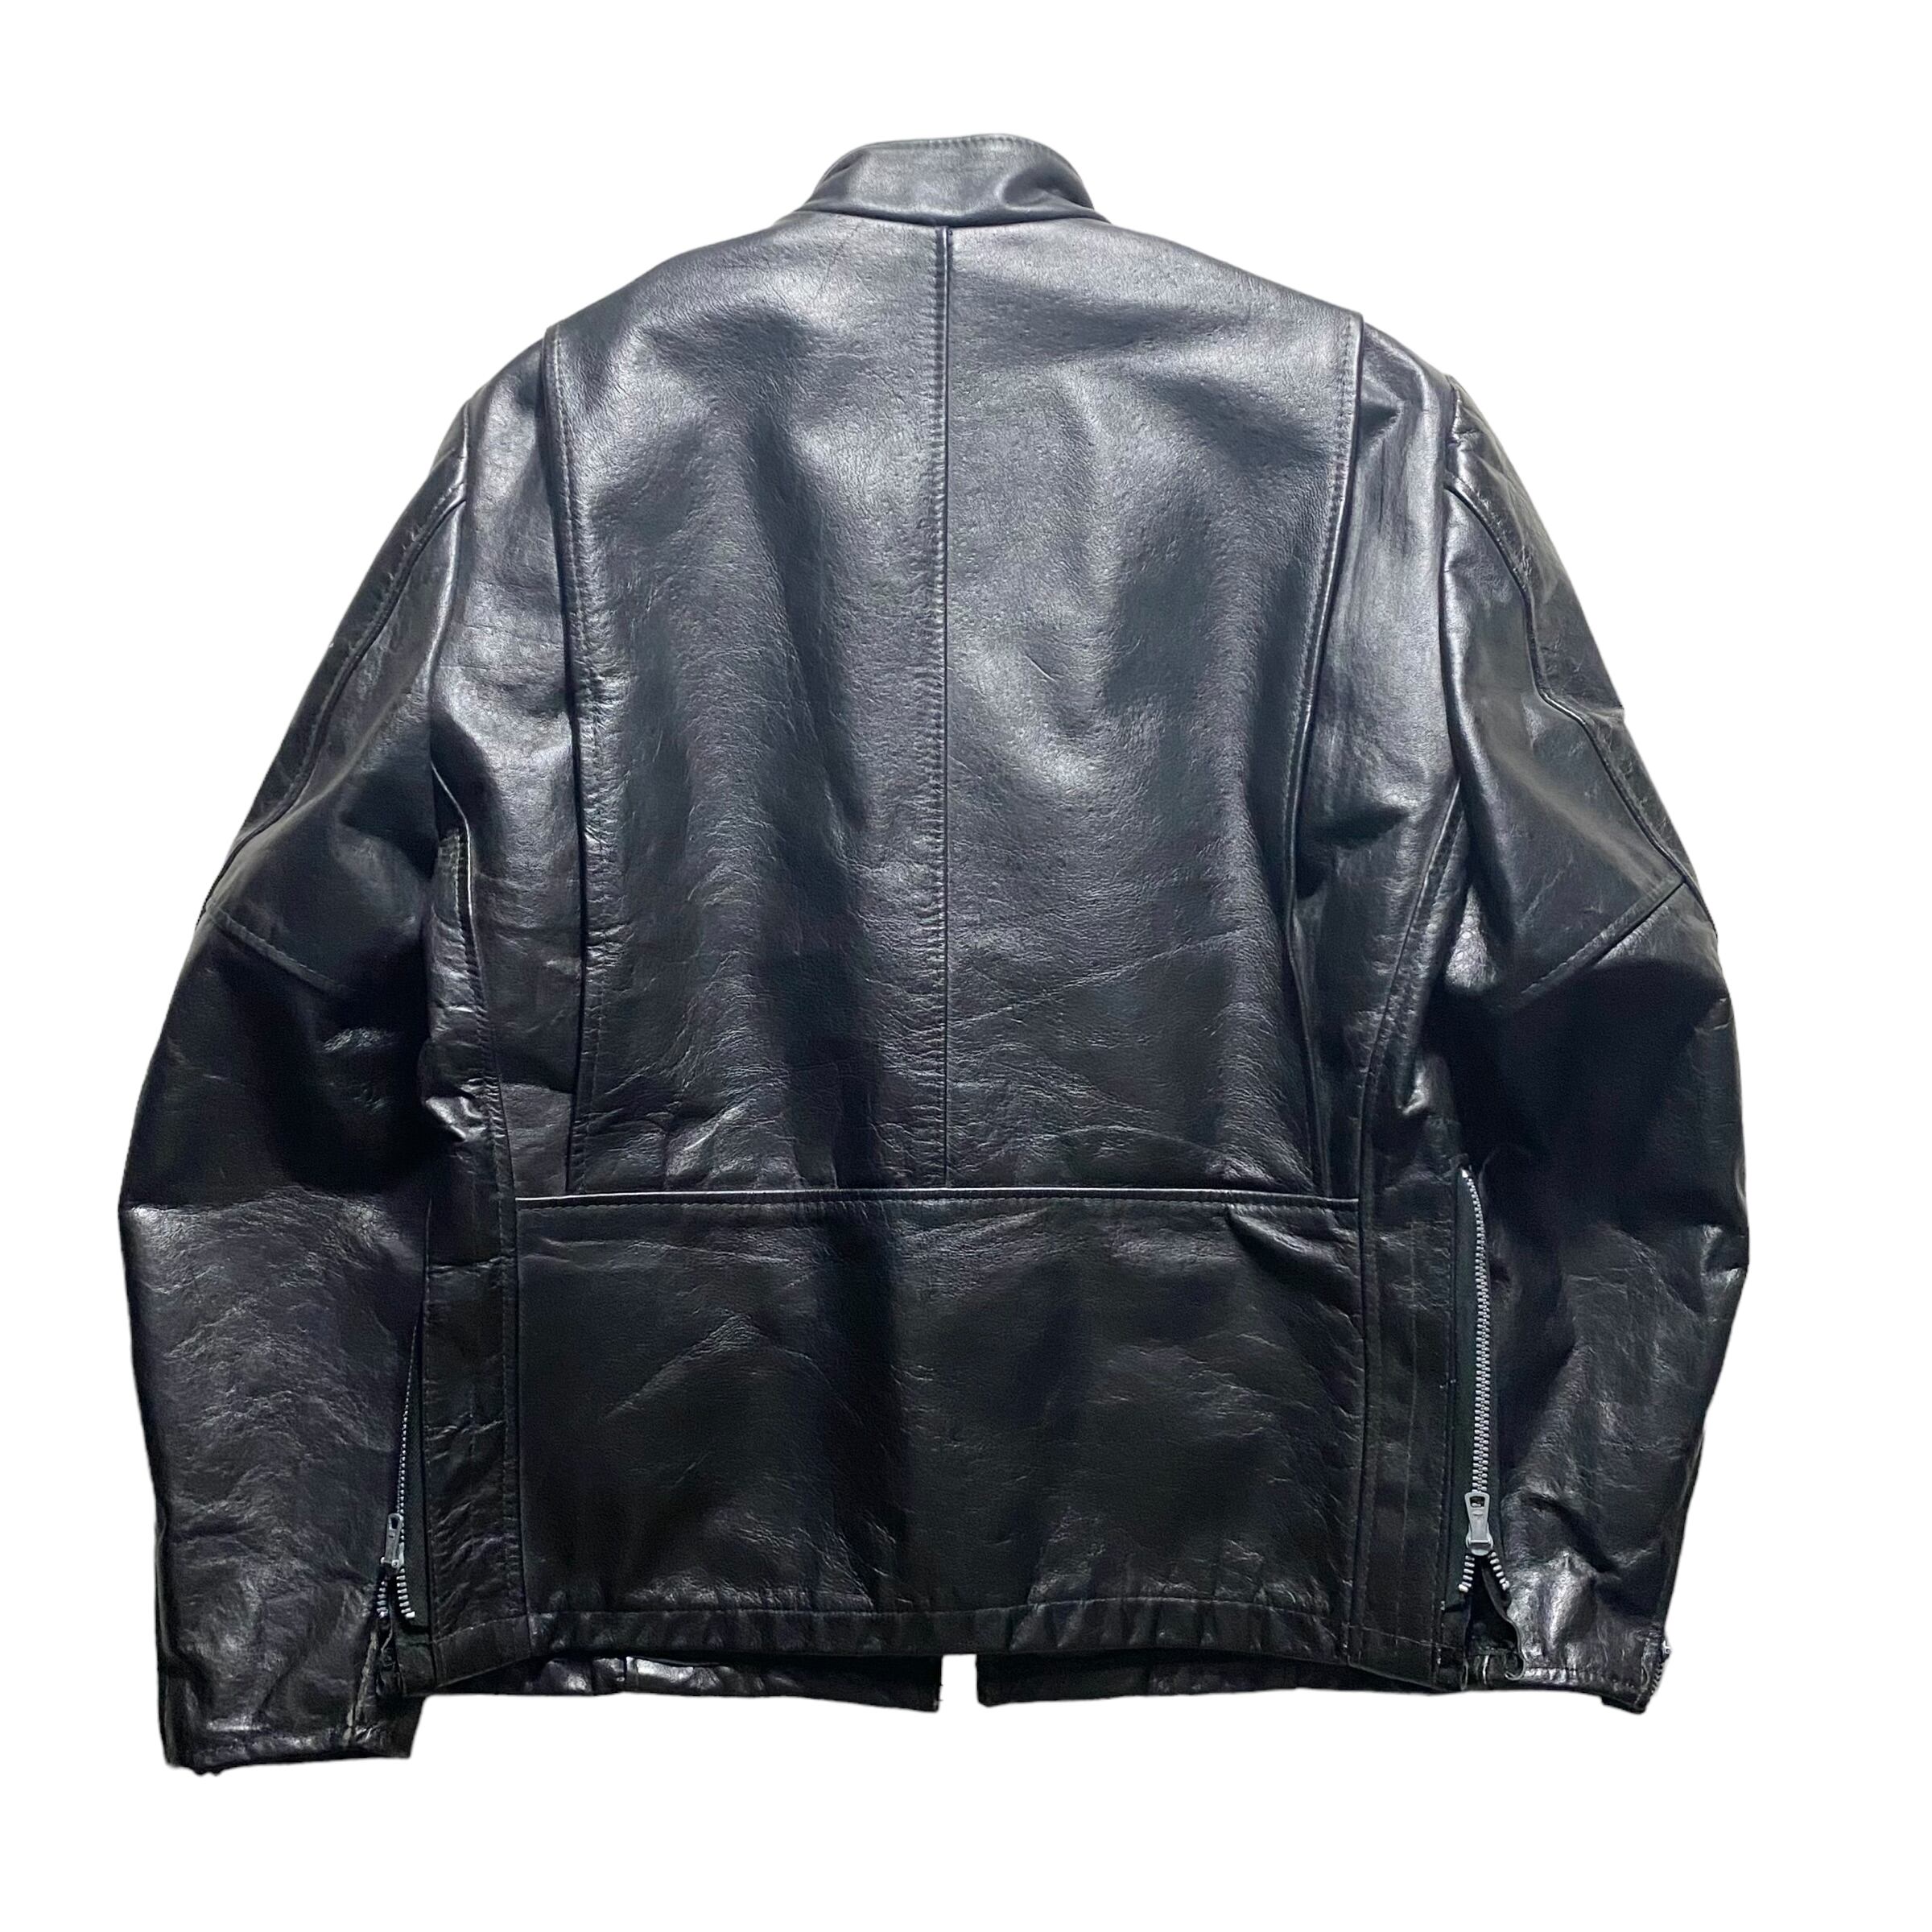 vintage 1970’s black leather riders jacket | NOIR ONLINE powered by BASE